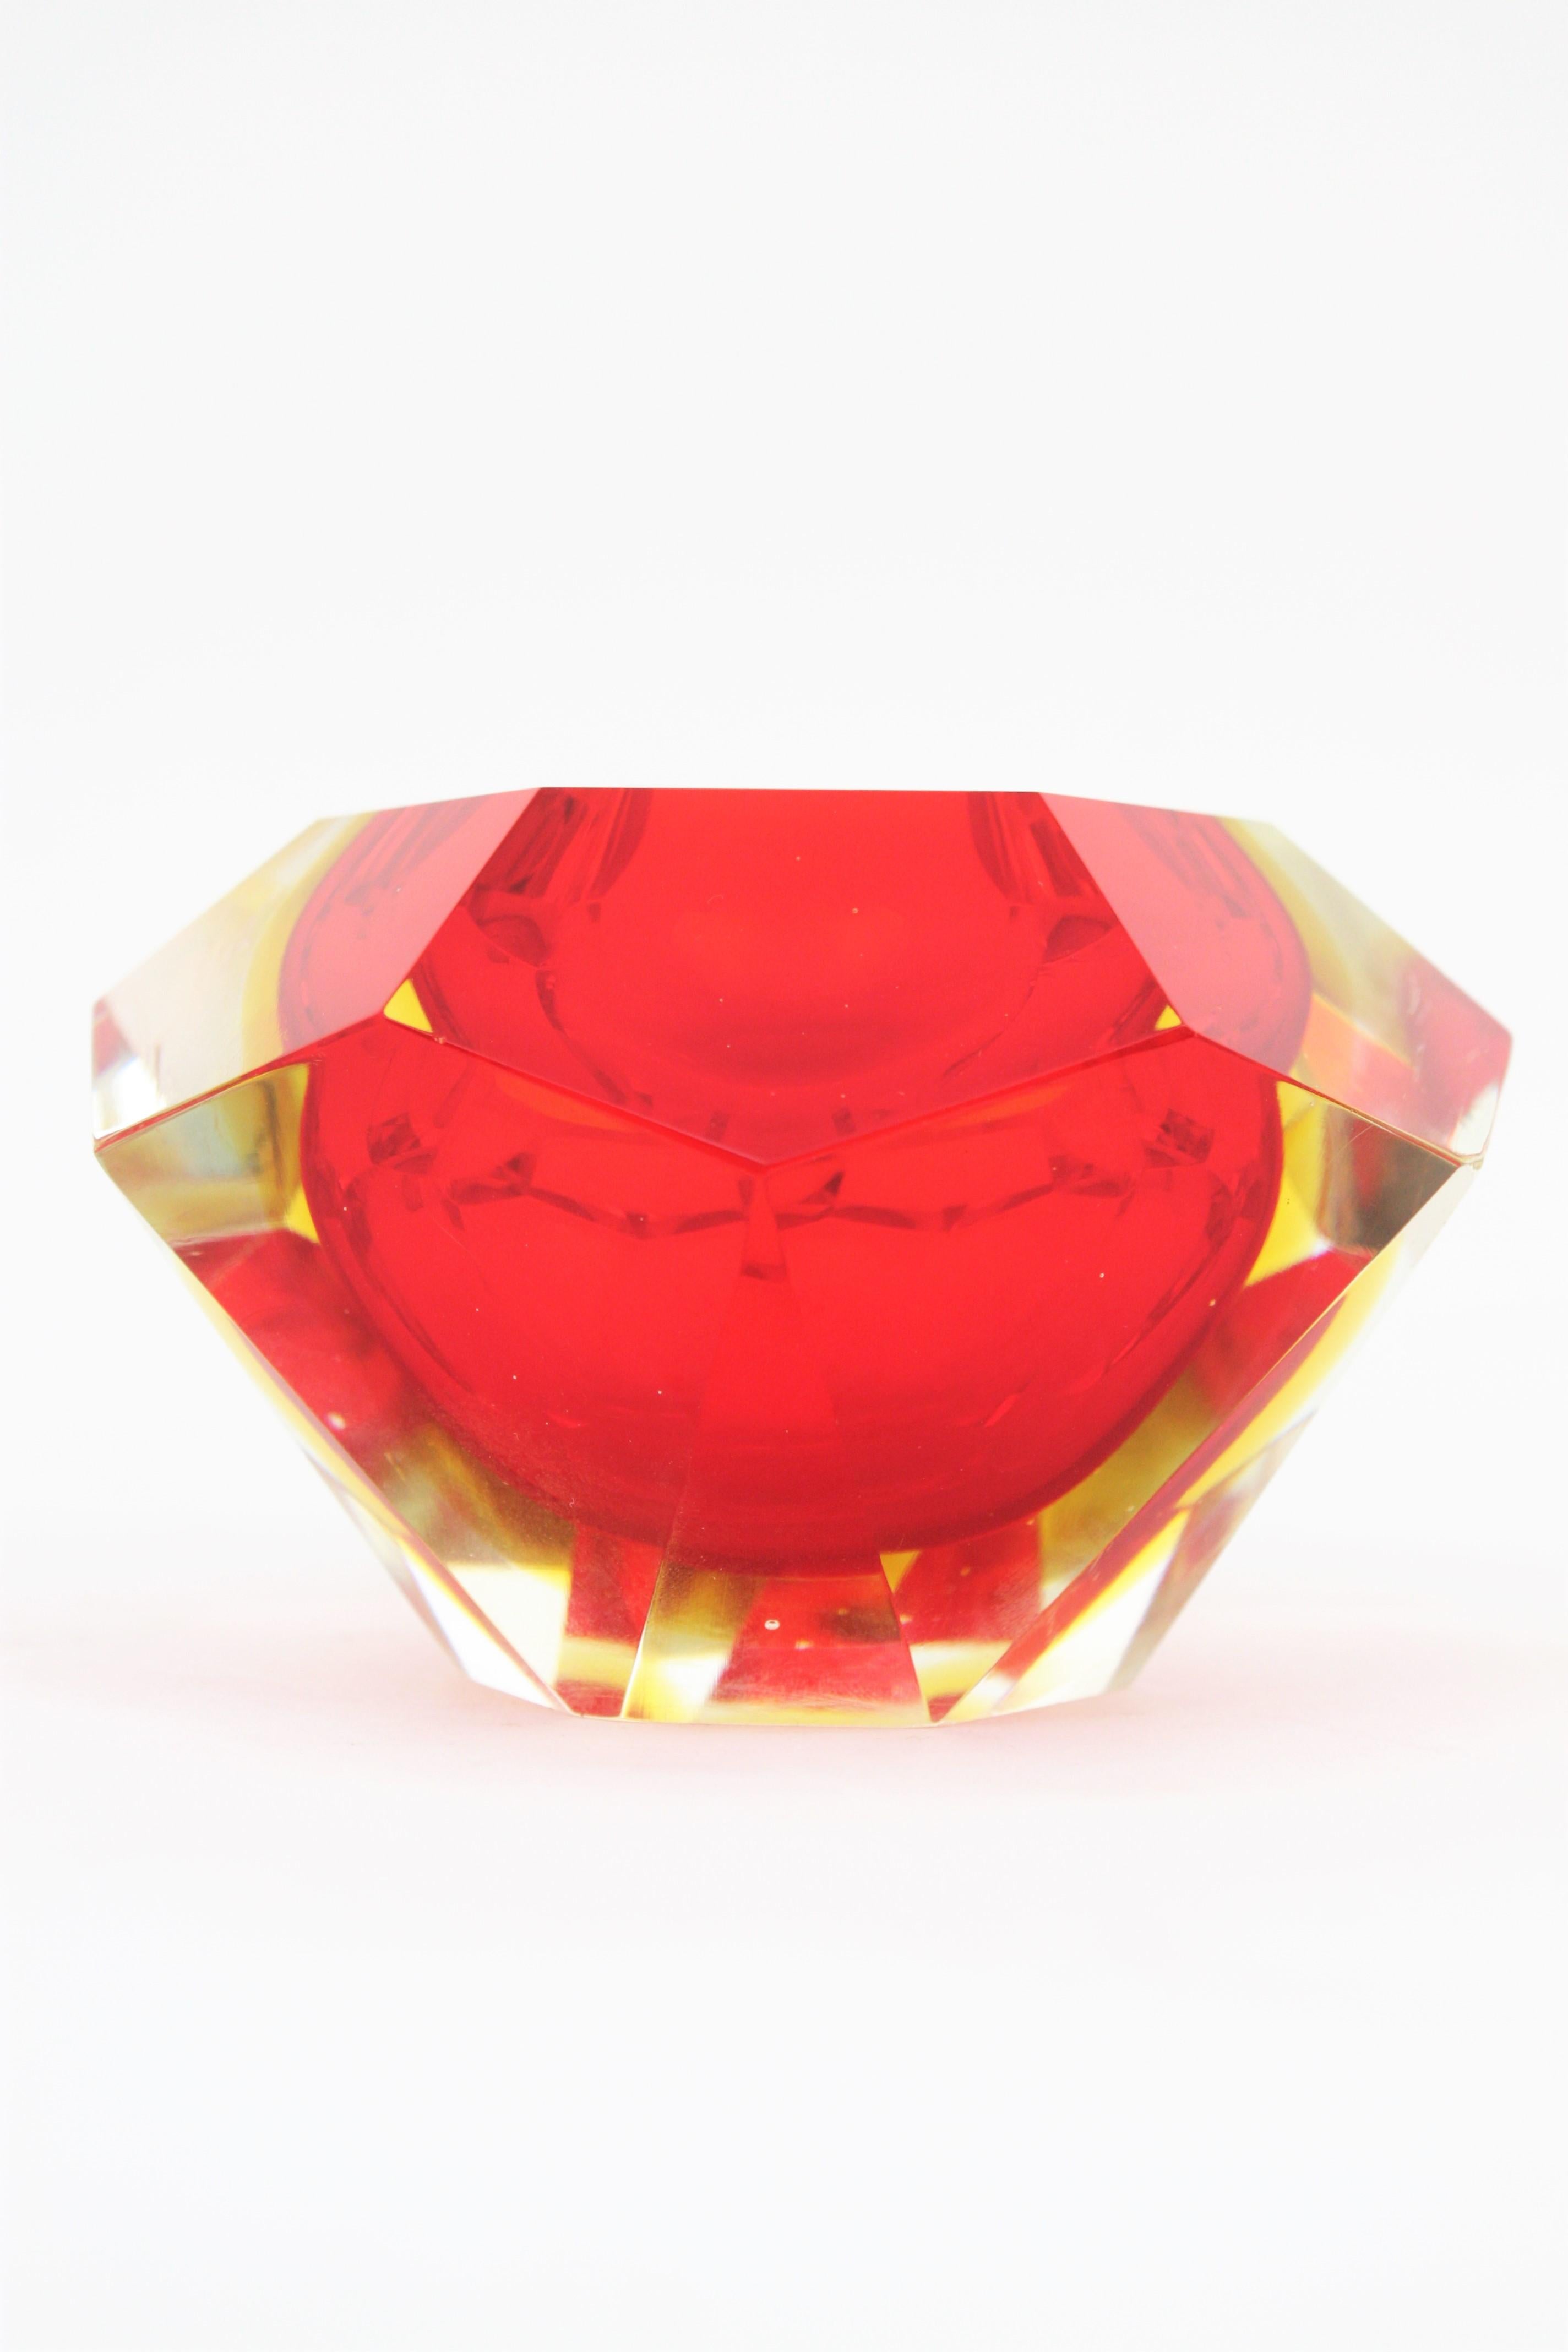 Flavio Poli Murano Red, Yellow and Clear Faceted Glass Diamond Bowl or Ashtray For Sale 2